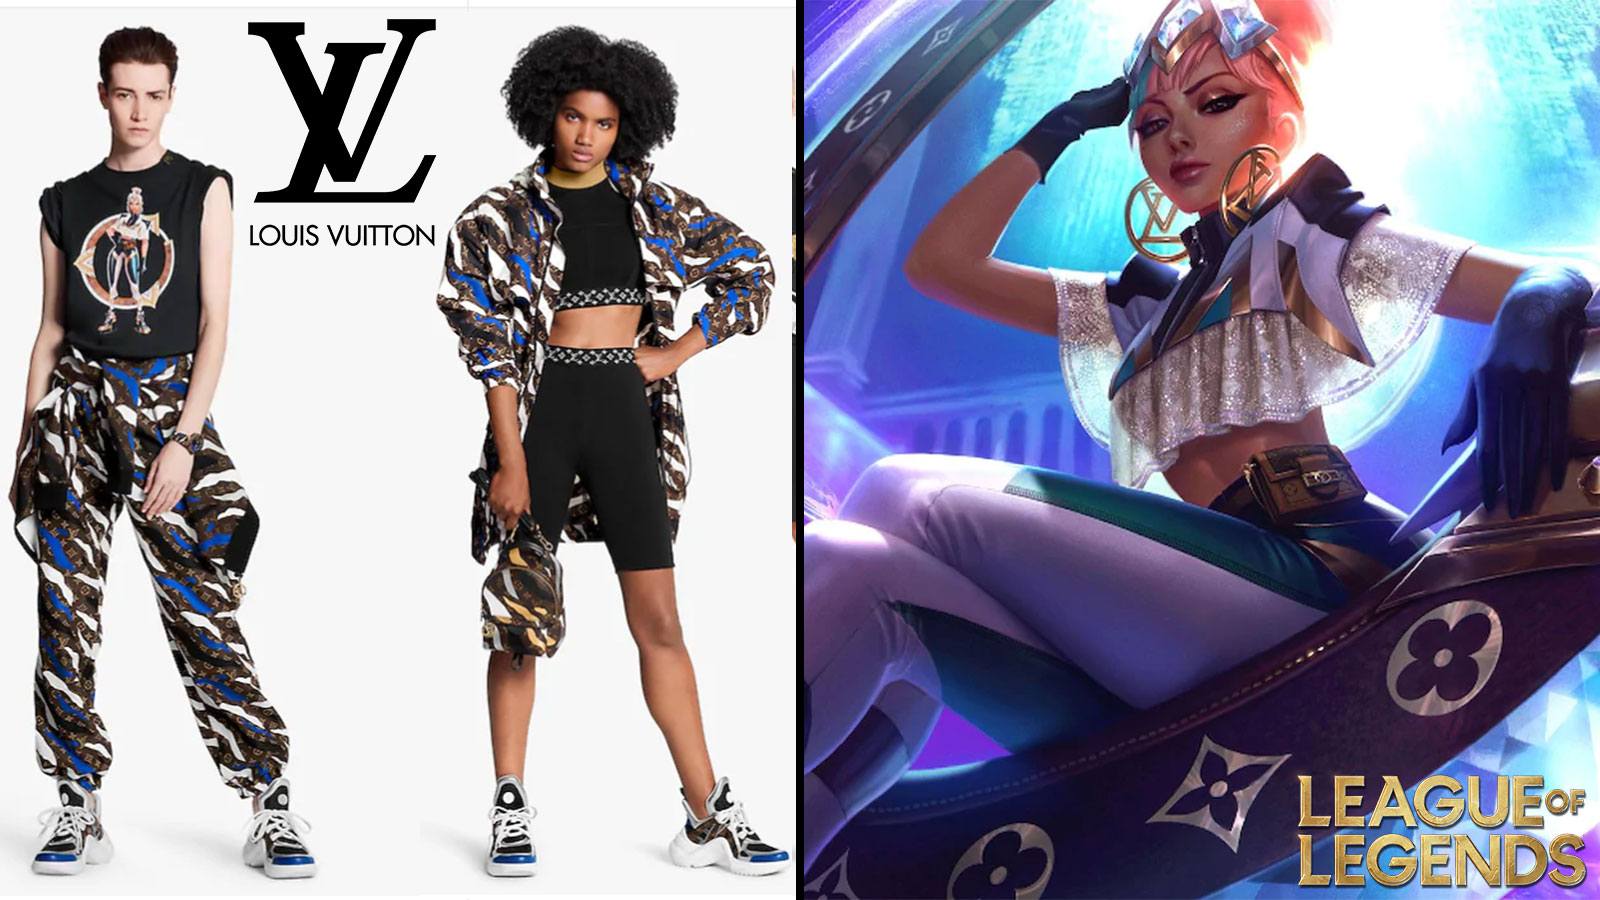 Louis Vuitton Released a Clothing Collaboration With League of Legends